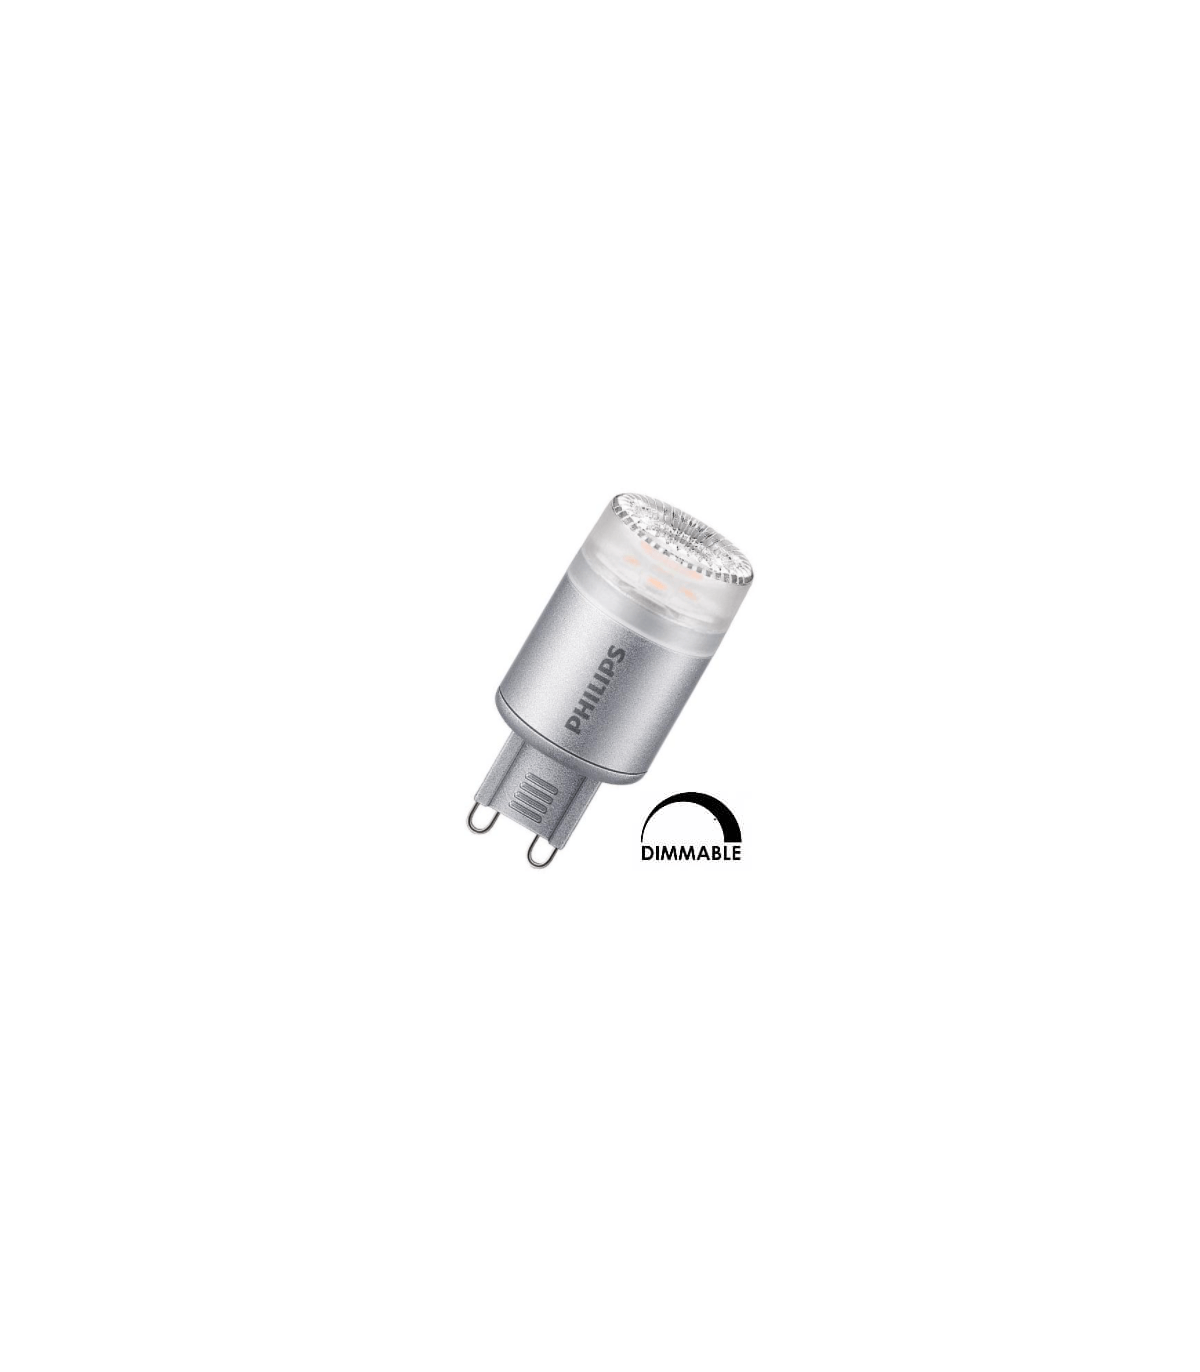 Ampoule Philips CorePro capsule 2,3W substitut 25W 215 lumens blanc chaud  2700K dimmable 220-240V G9